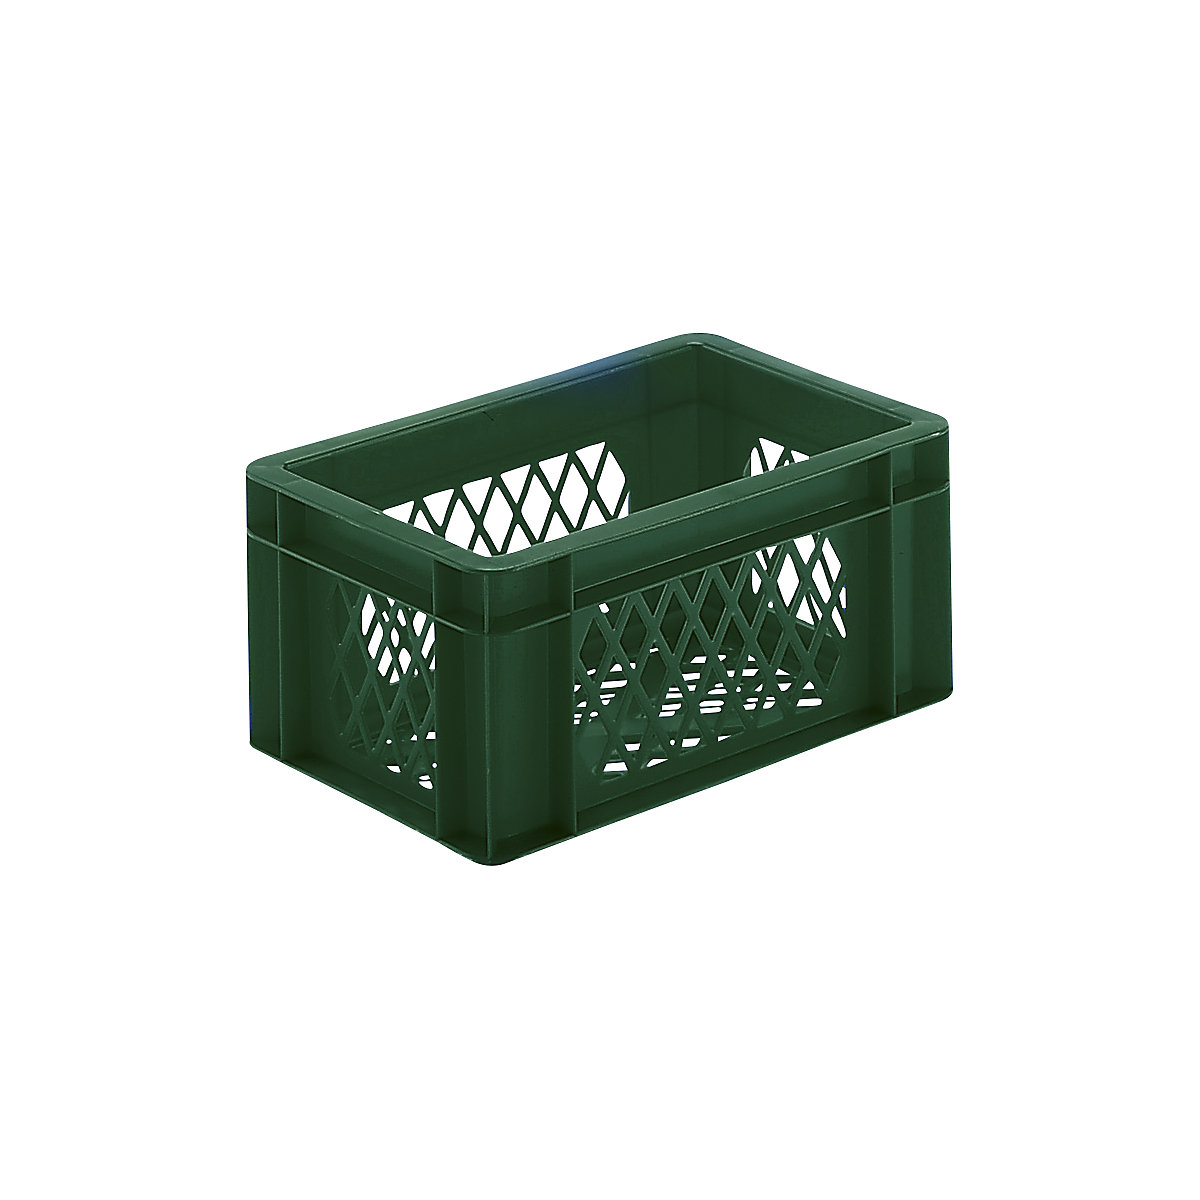 Euro stacking container, perforated walls and base, LxWxH 300 x 200 x 145 mm, green, pack of 5-8